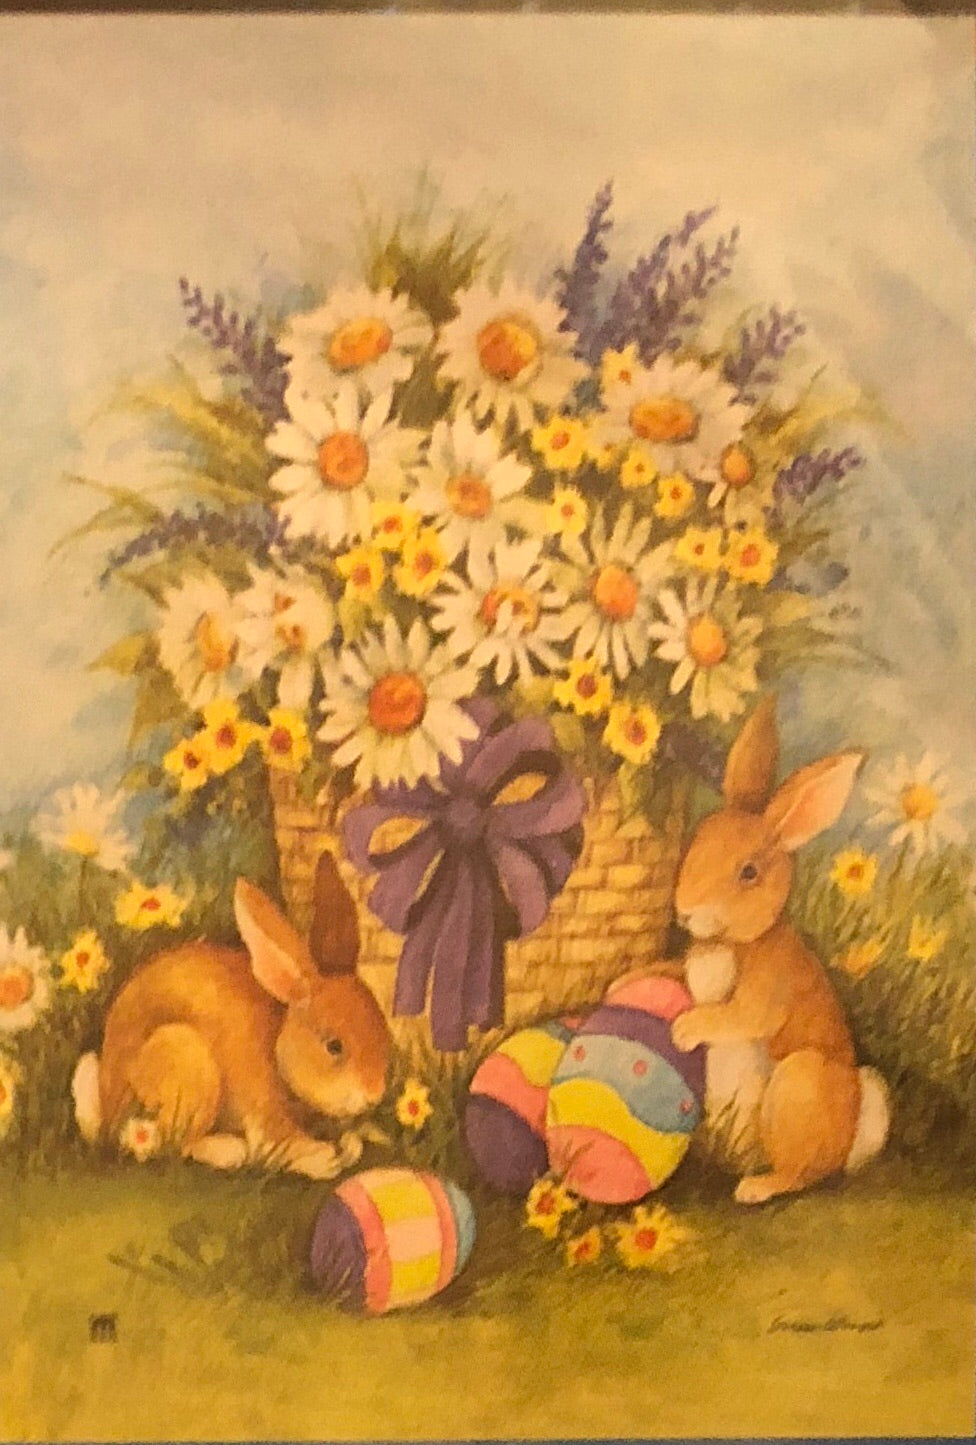 Easter Bunnies- Large Flag